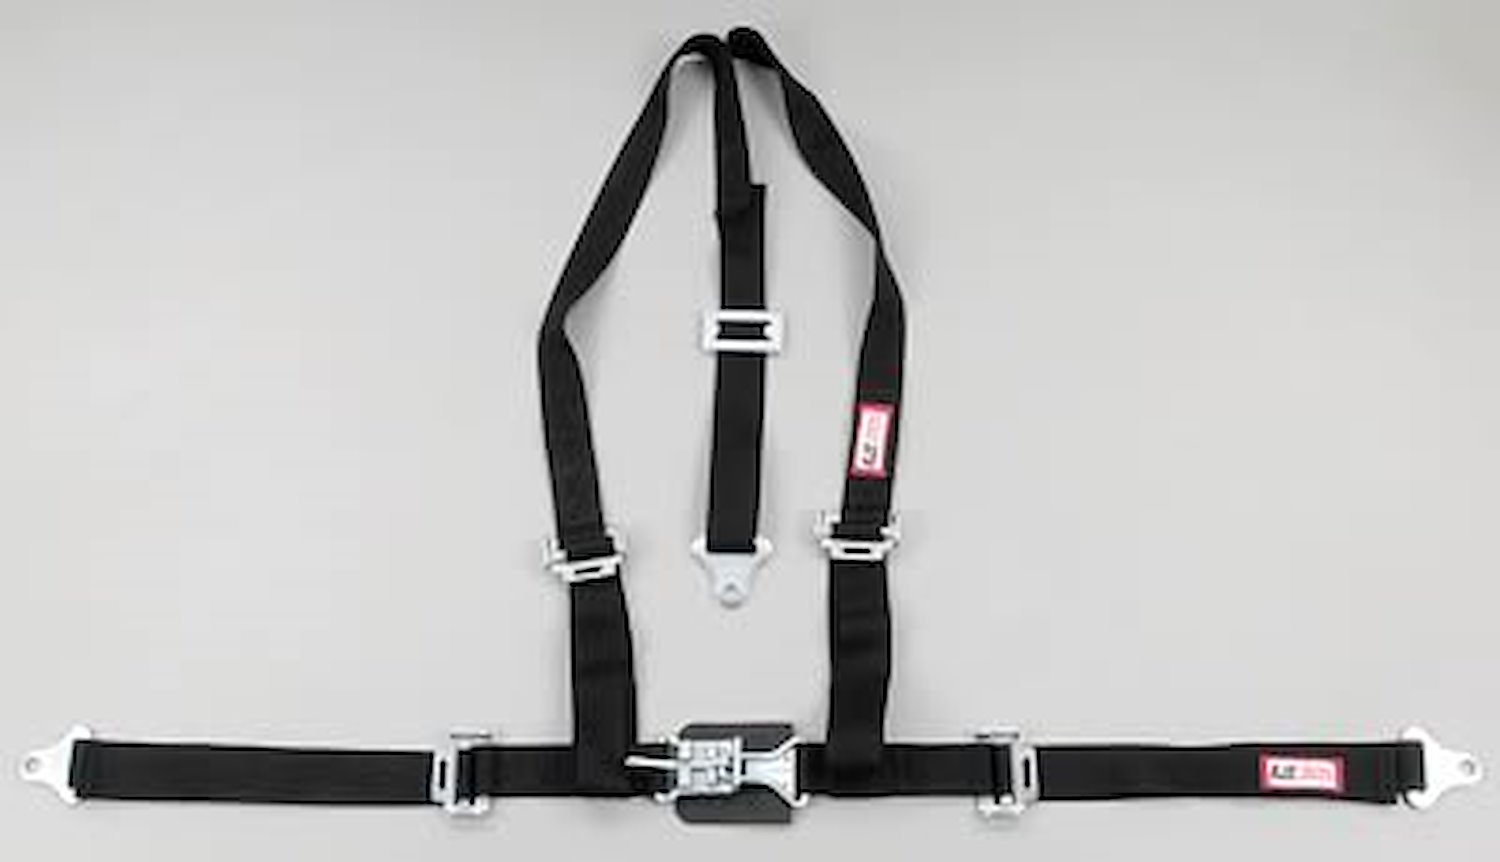 NON-SFI L&L HARNESS 2 PULL UP Lap Belt SNAP SEWN IN 2 S.H. Individual ROLL BAR Mount w/STERNUM STRAP WRAP/SNAP BLUE